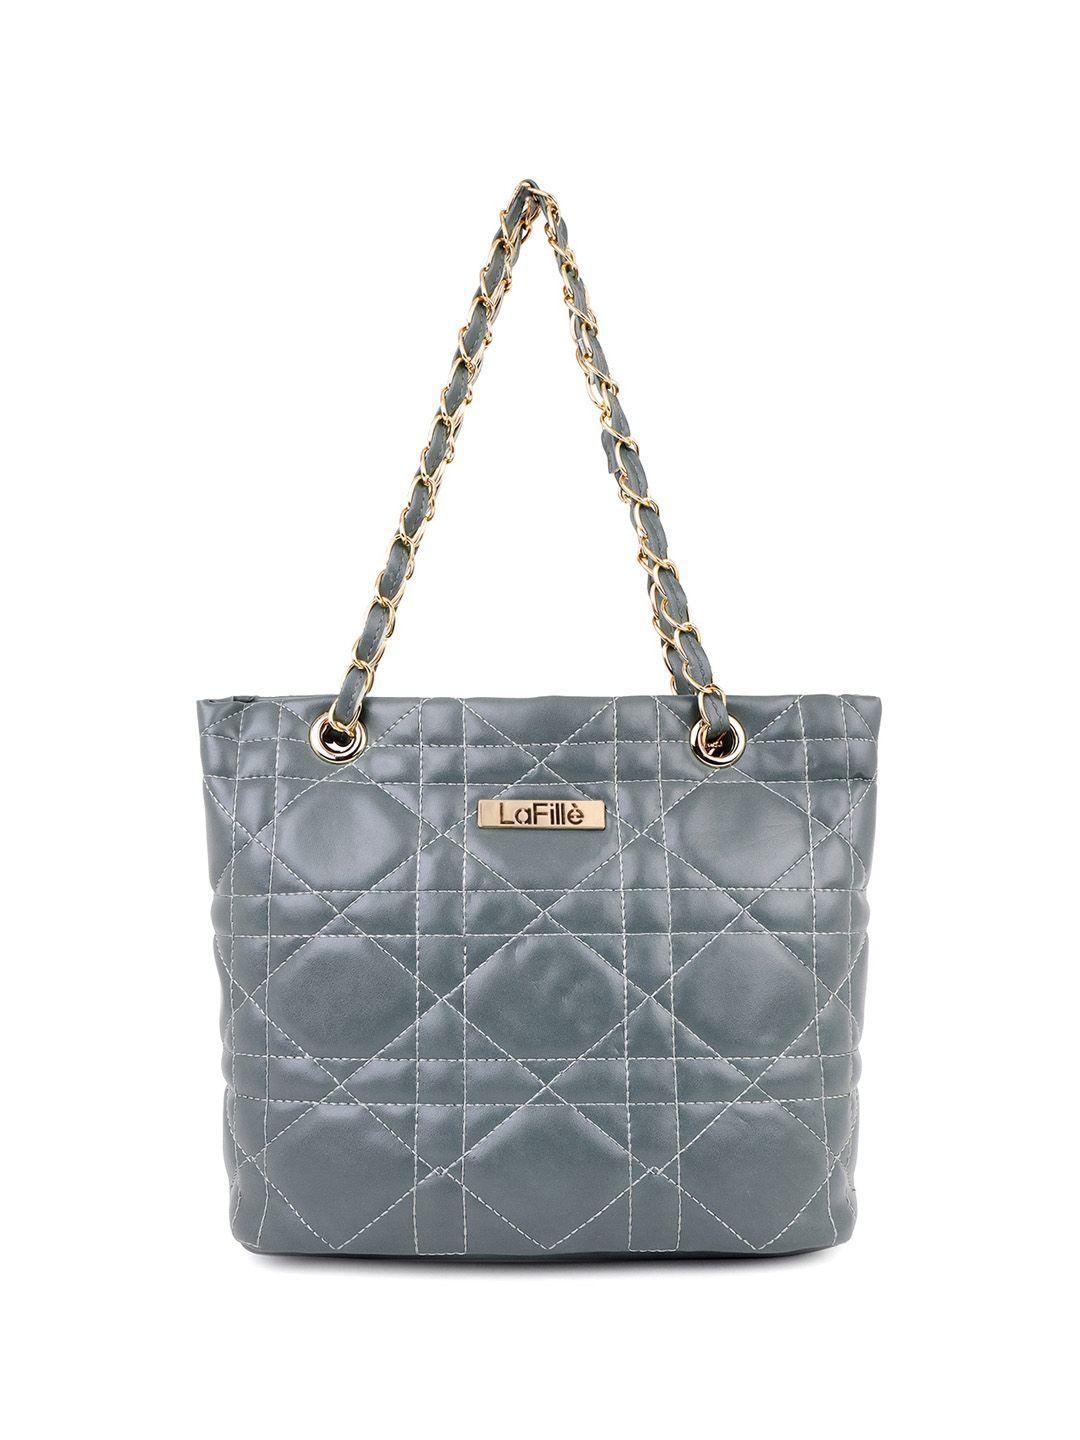 lafille textured structured tote bag with quilted